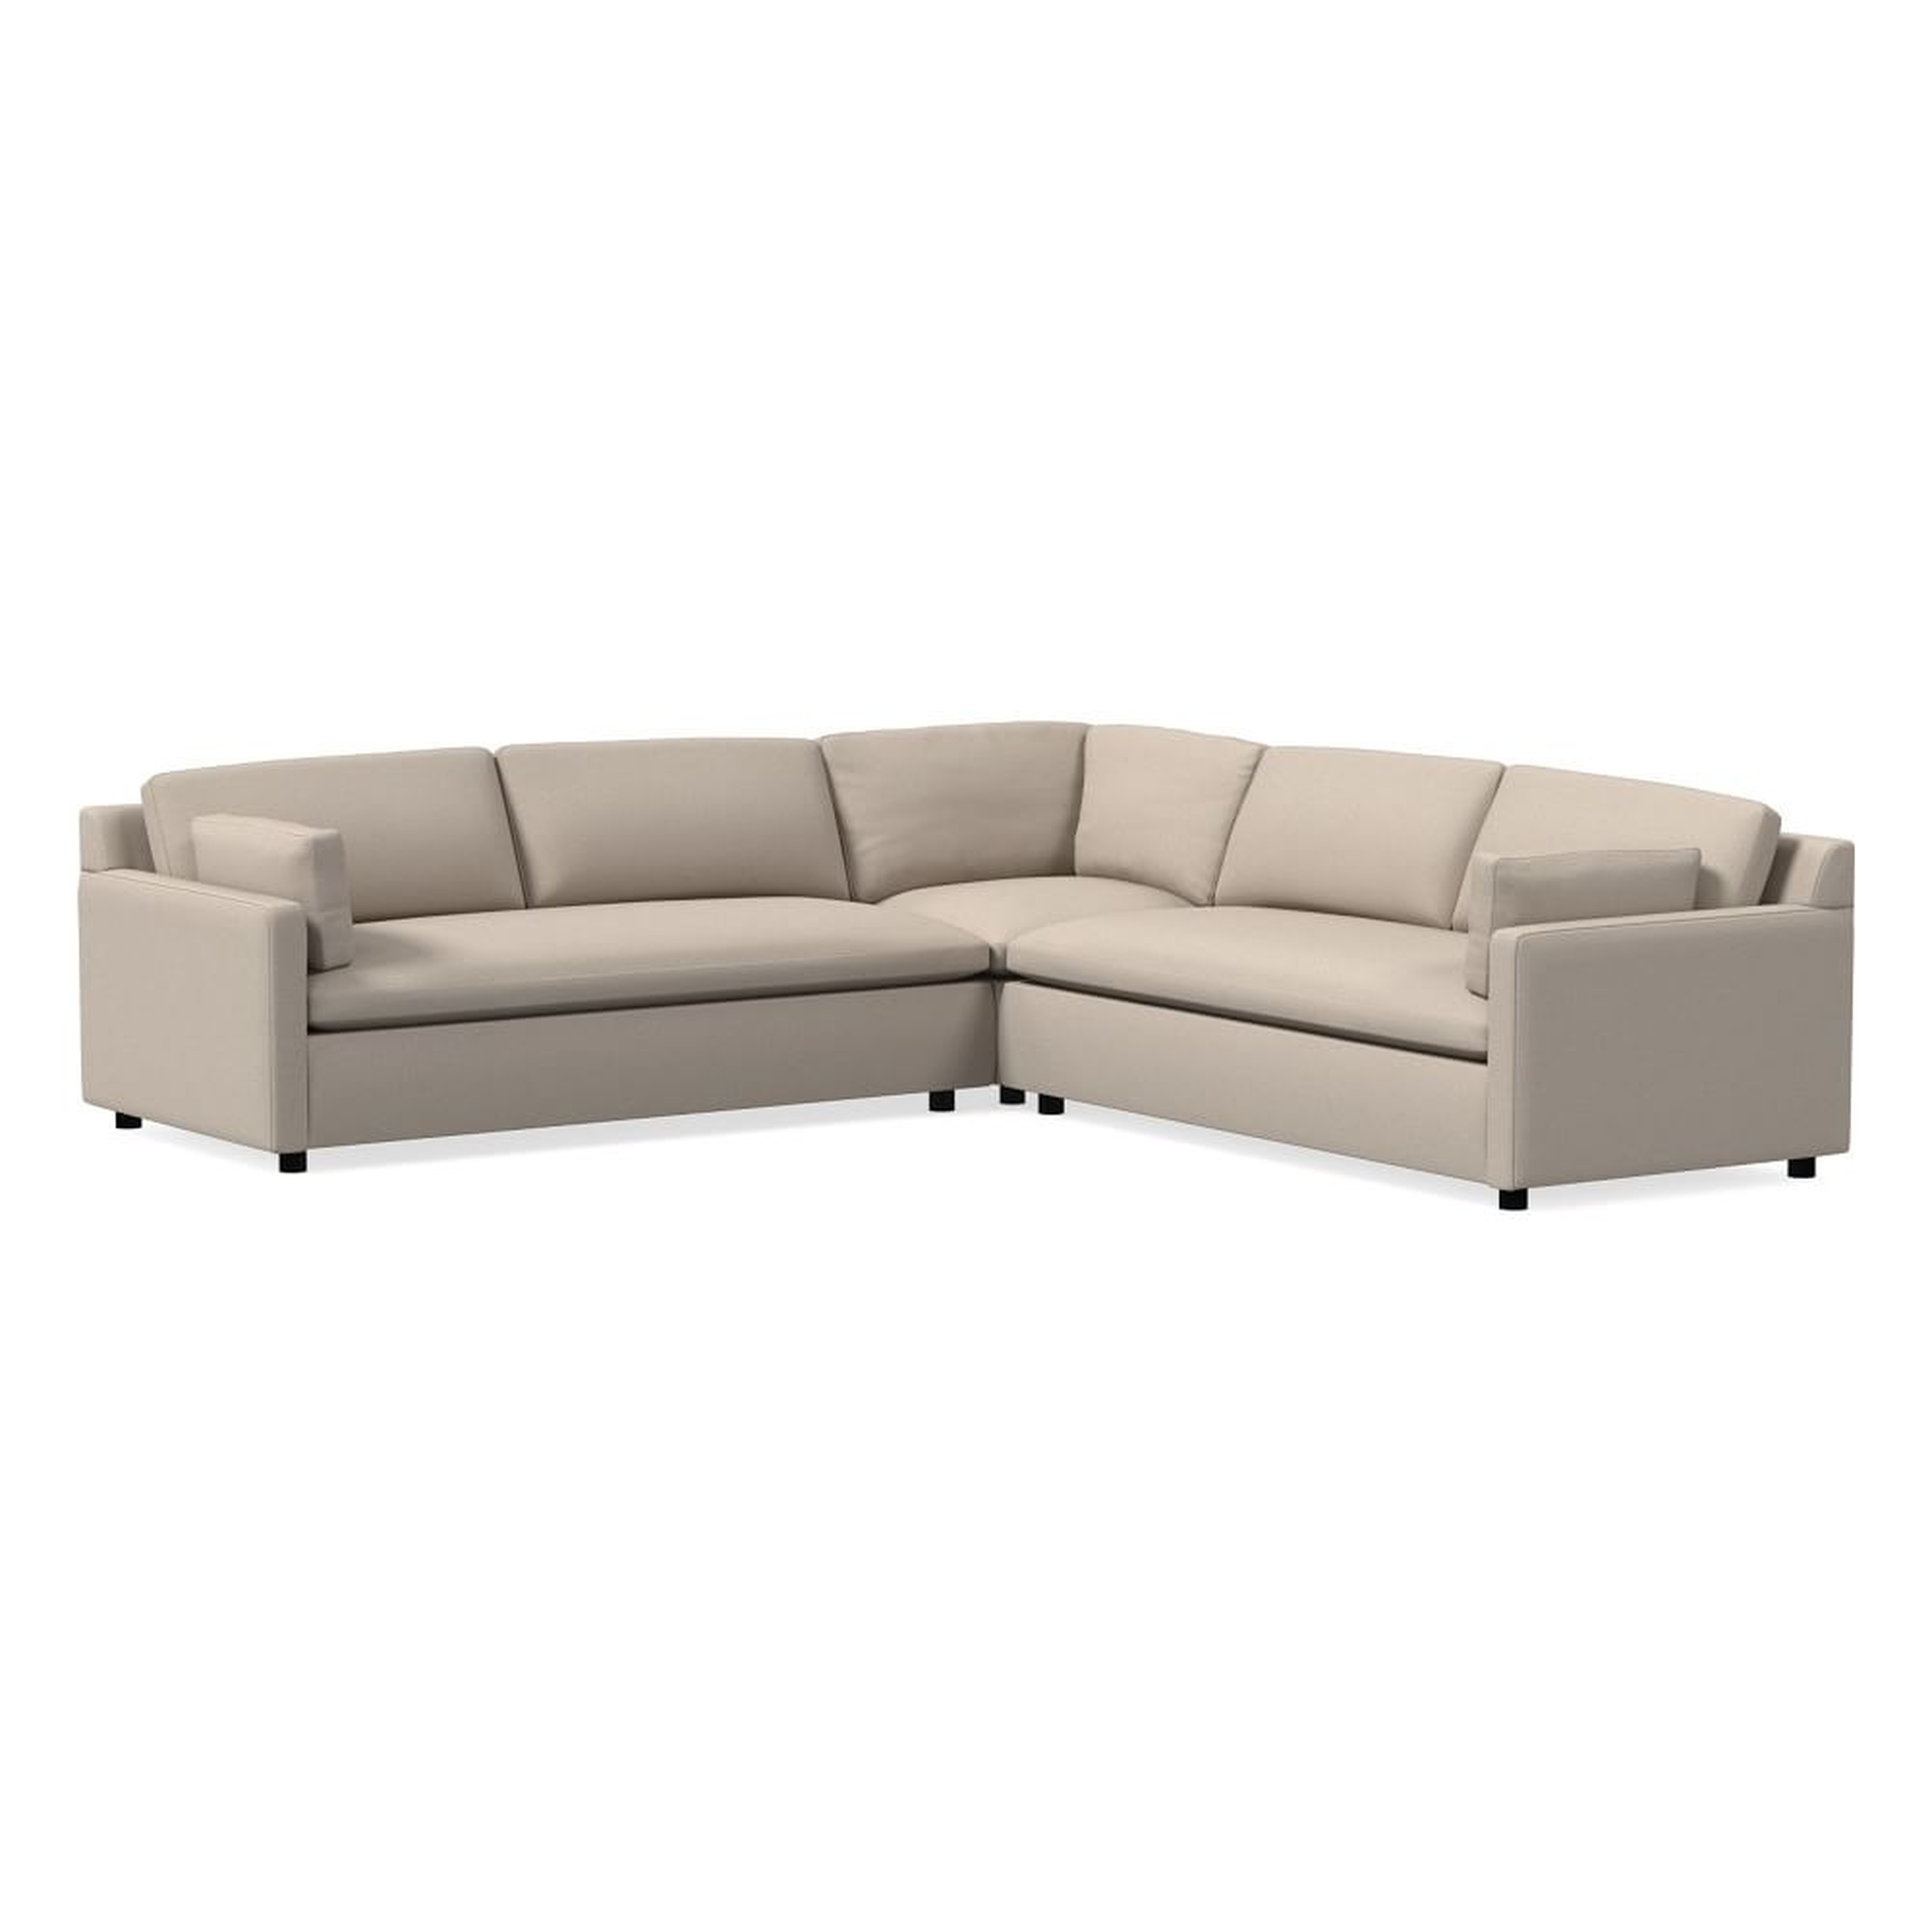 Marin 114" 3-Piece L-Shaped Sectional, Standard Depth, Performance Yarn Dyed Linen Weave, Sand - West Elm